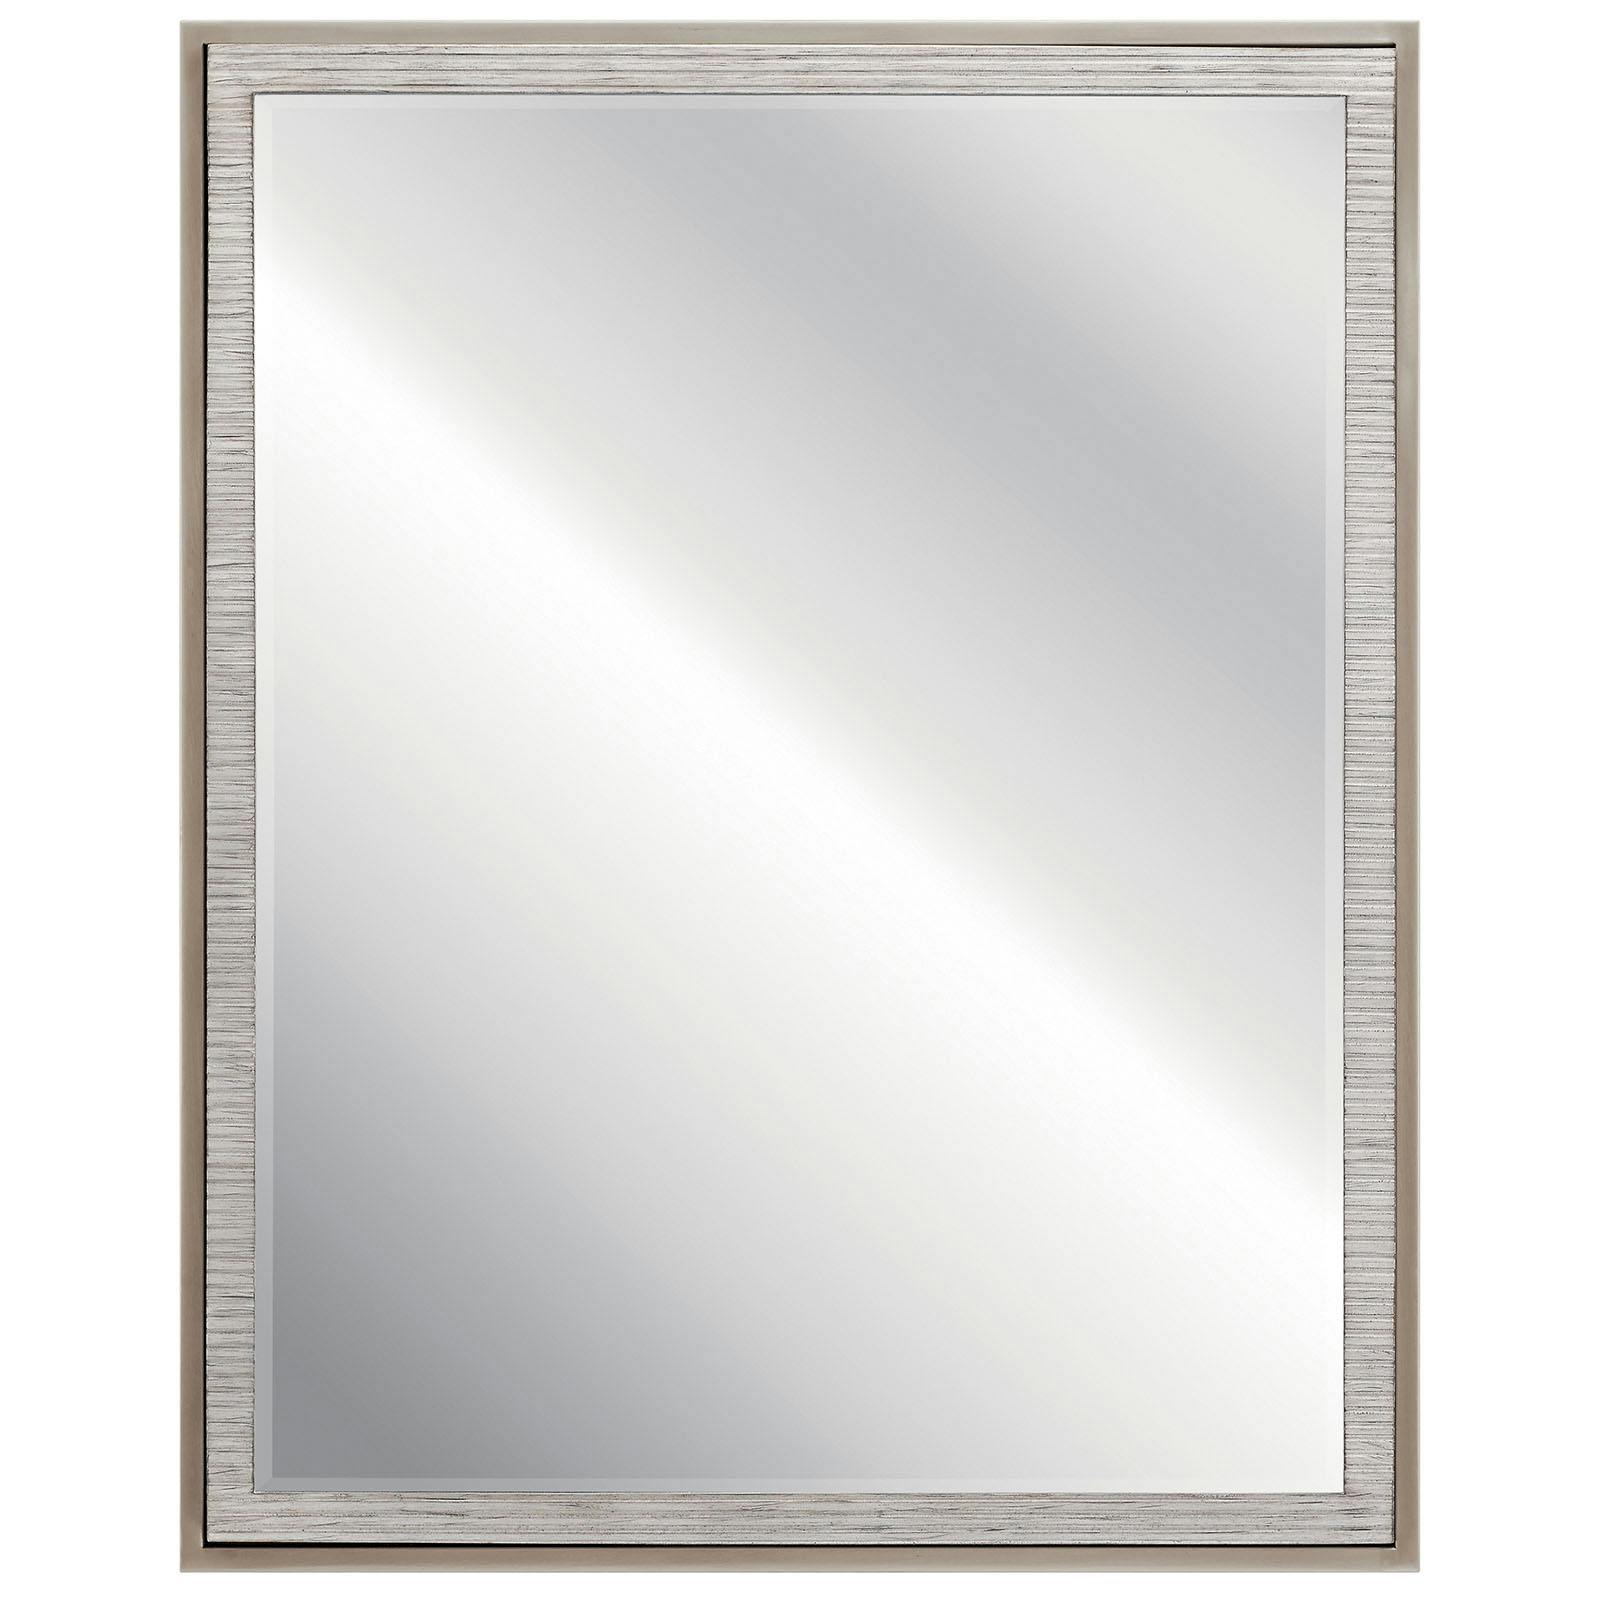 Millwright™ Mirror in Rubbed Gray on a white background